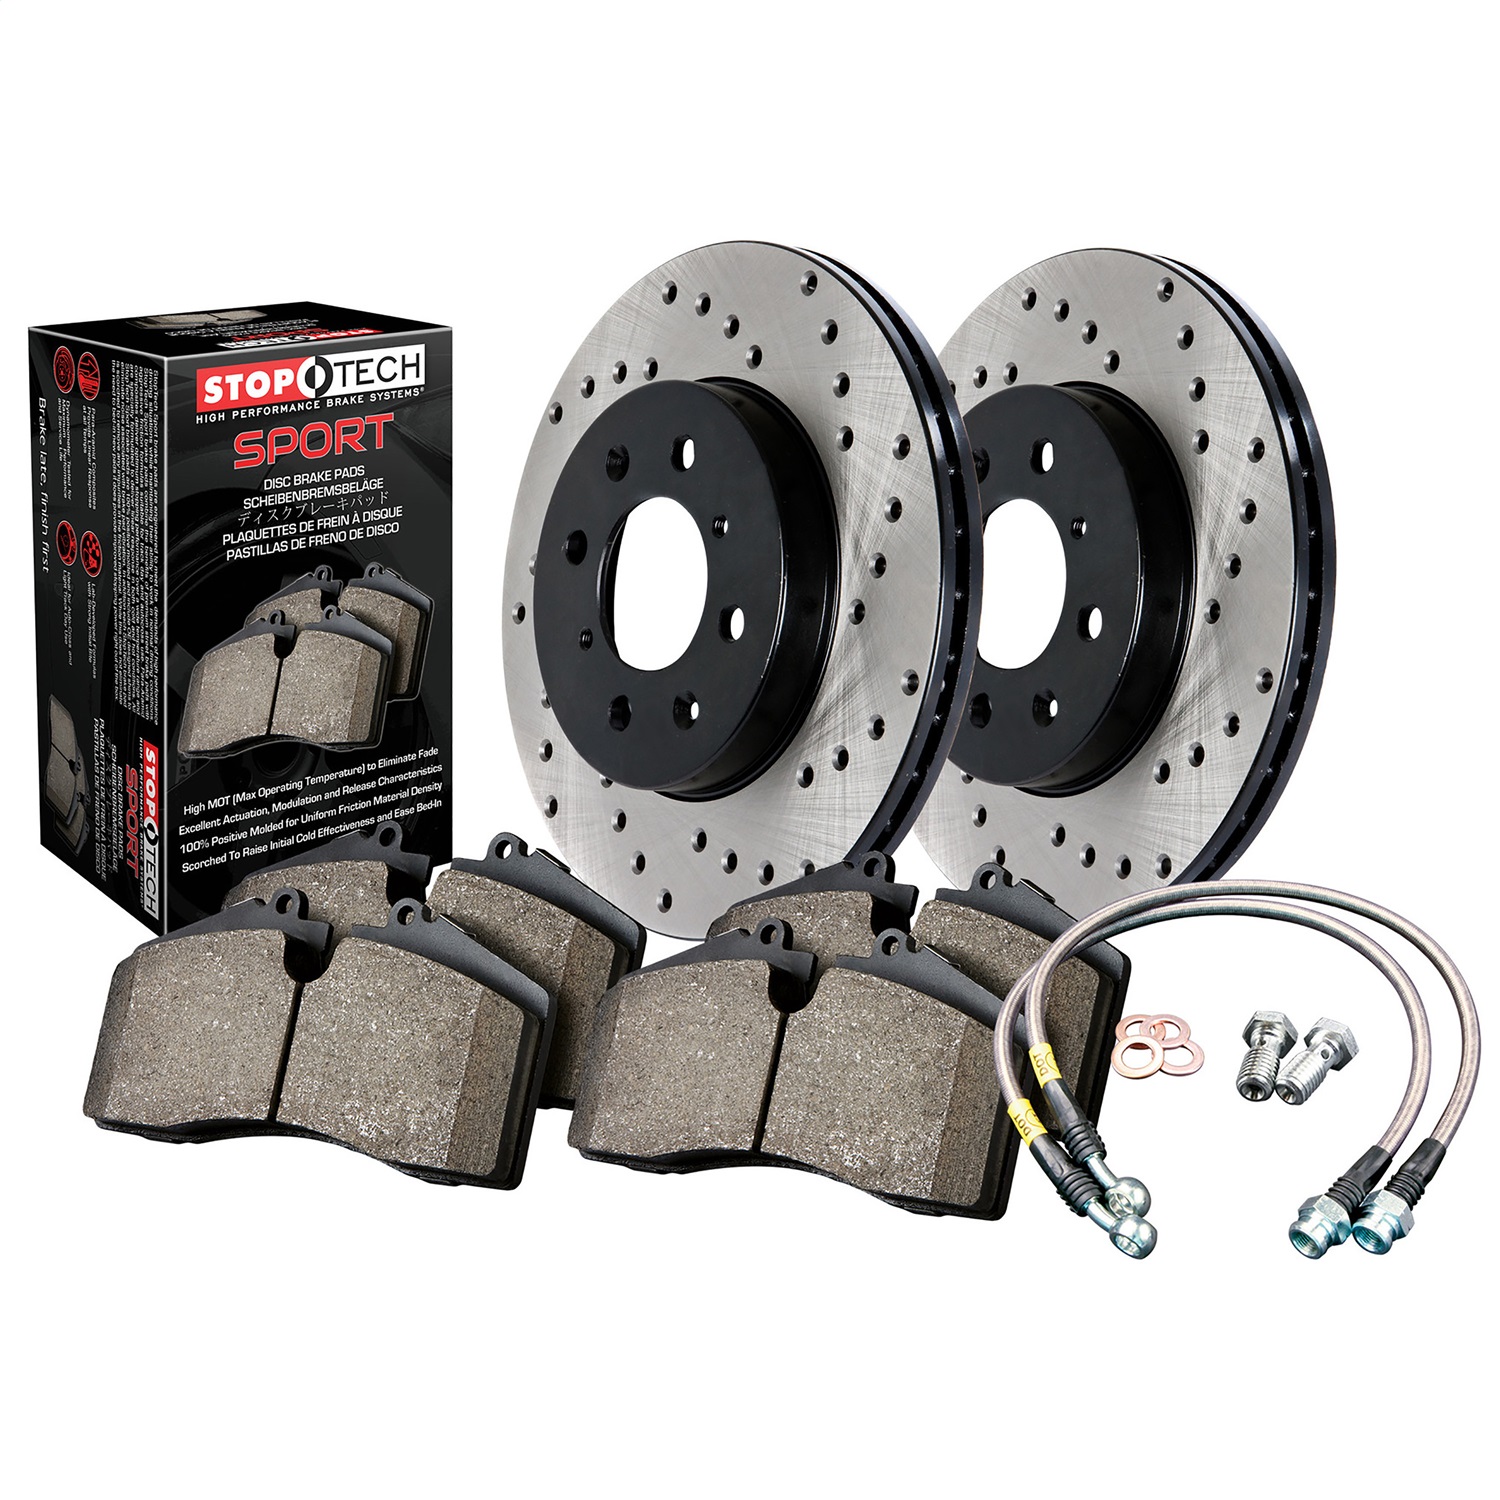 StopTech 979.42005R Sport Disc Brake Kit w/Cross-Drilled Rotors Fits 89-96 300ZX